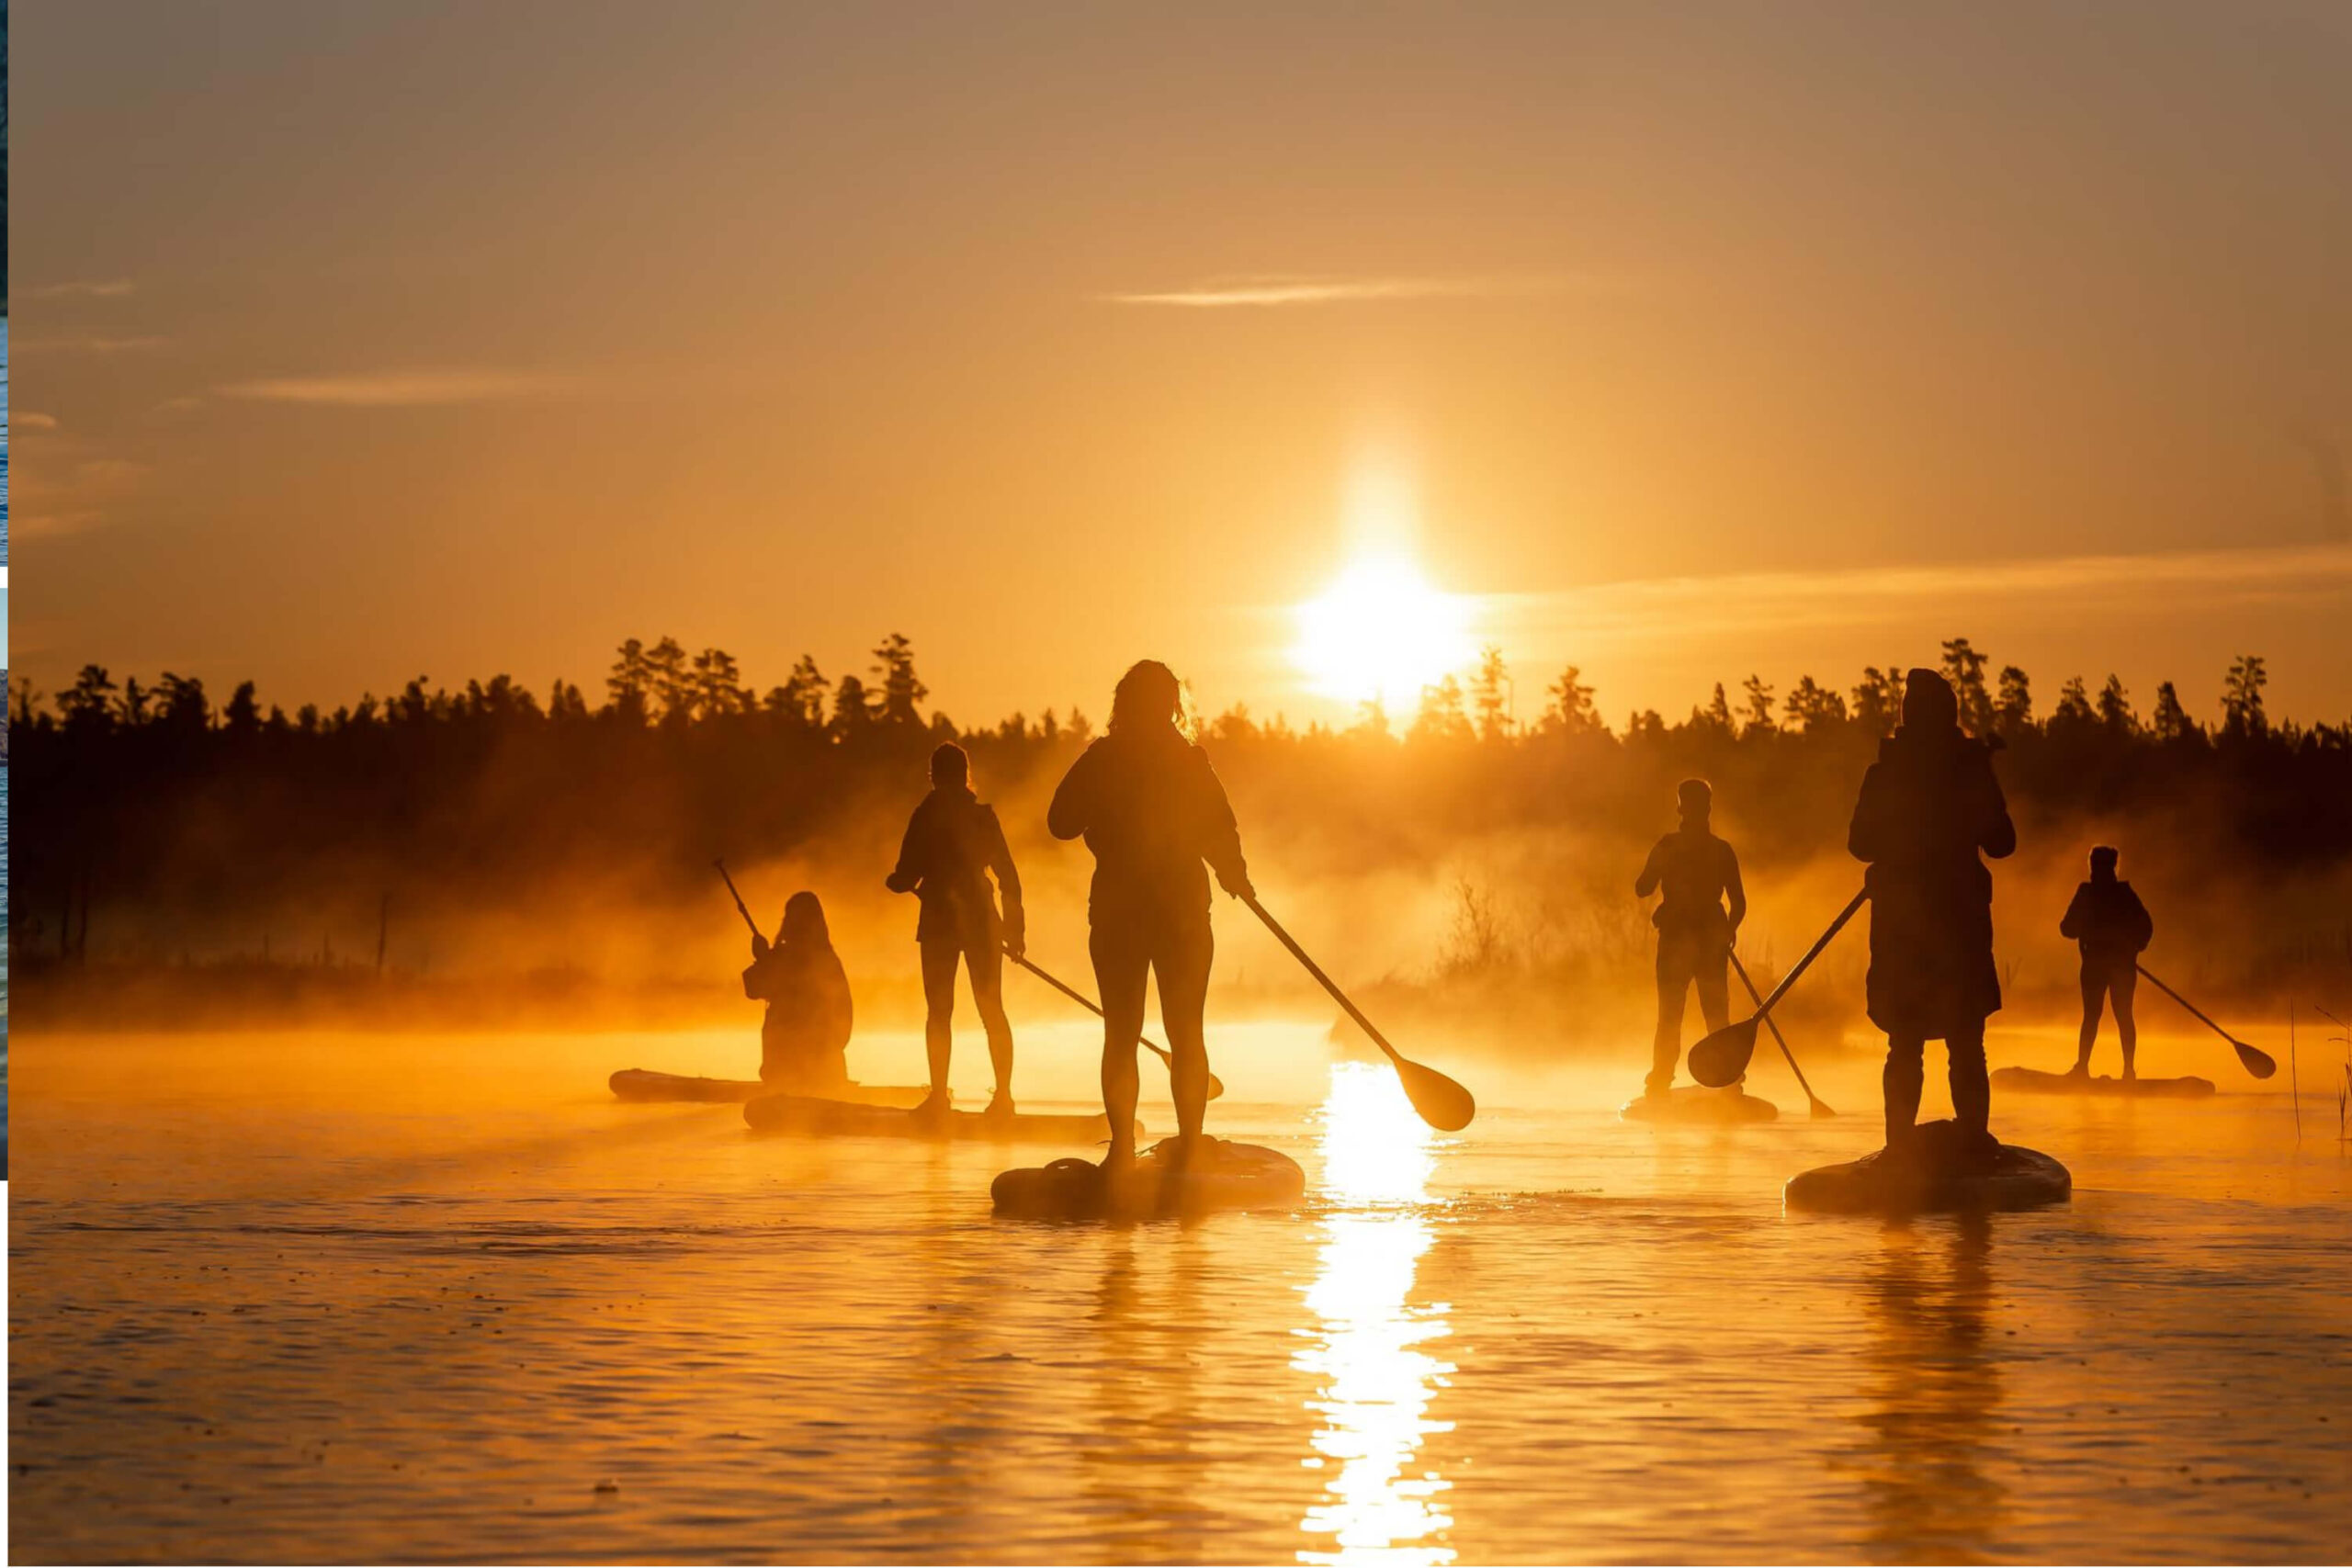 A group of paddleboarders, lit by the stting sun bathed in mist